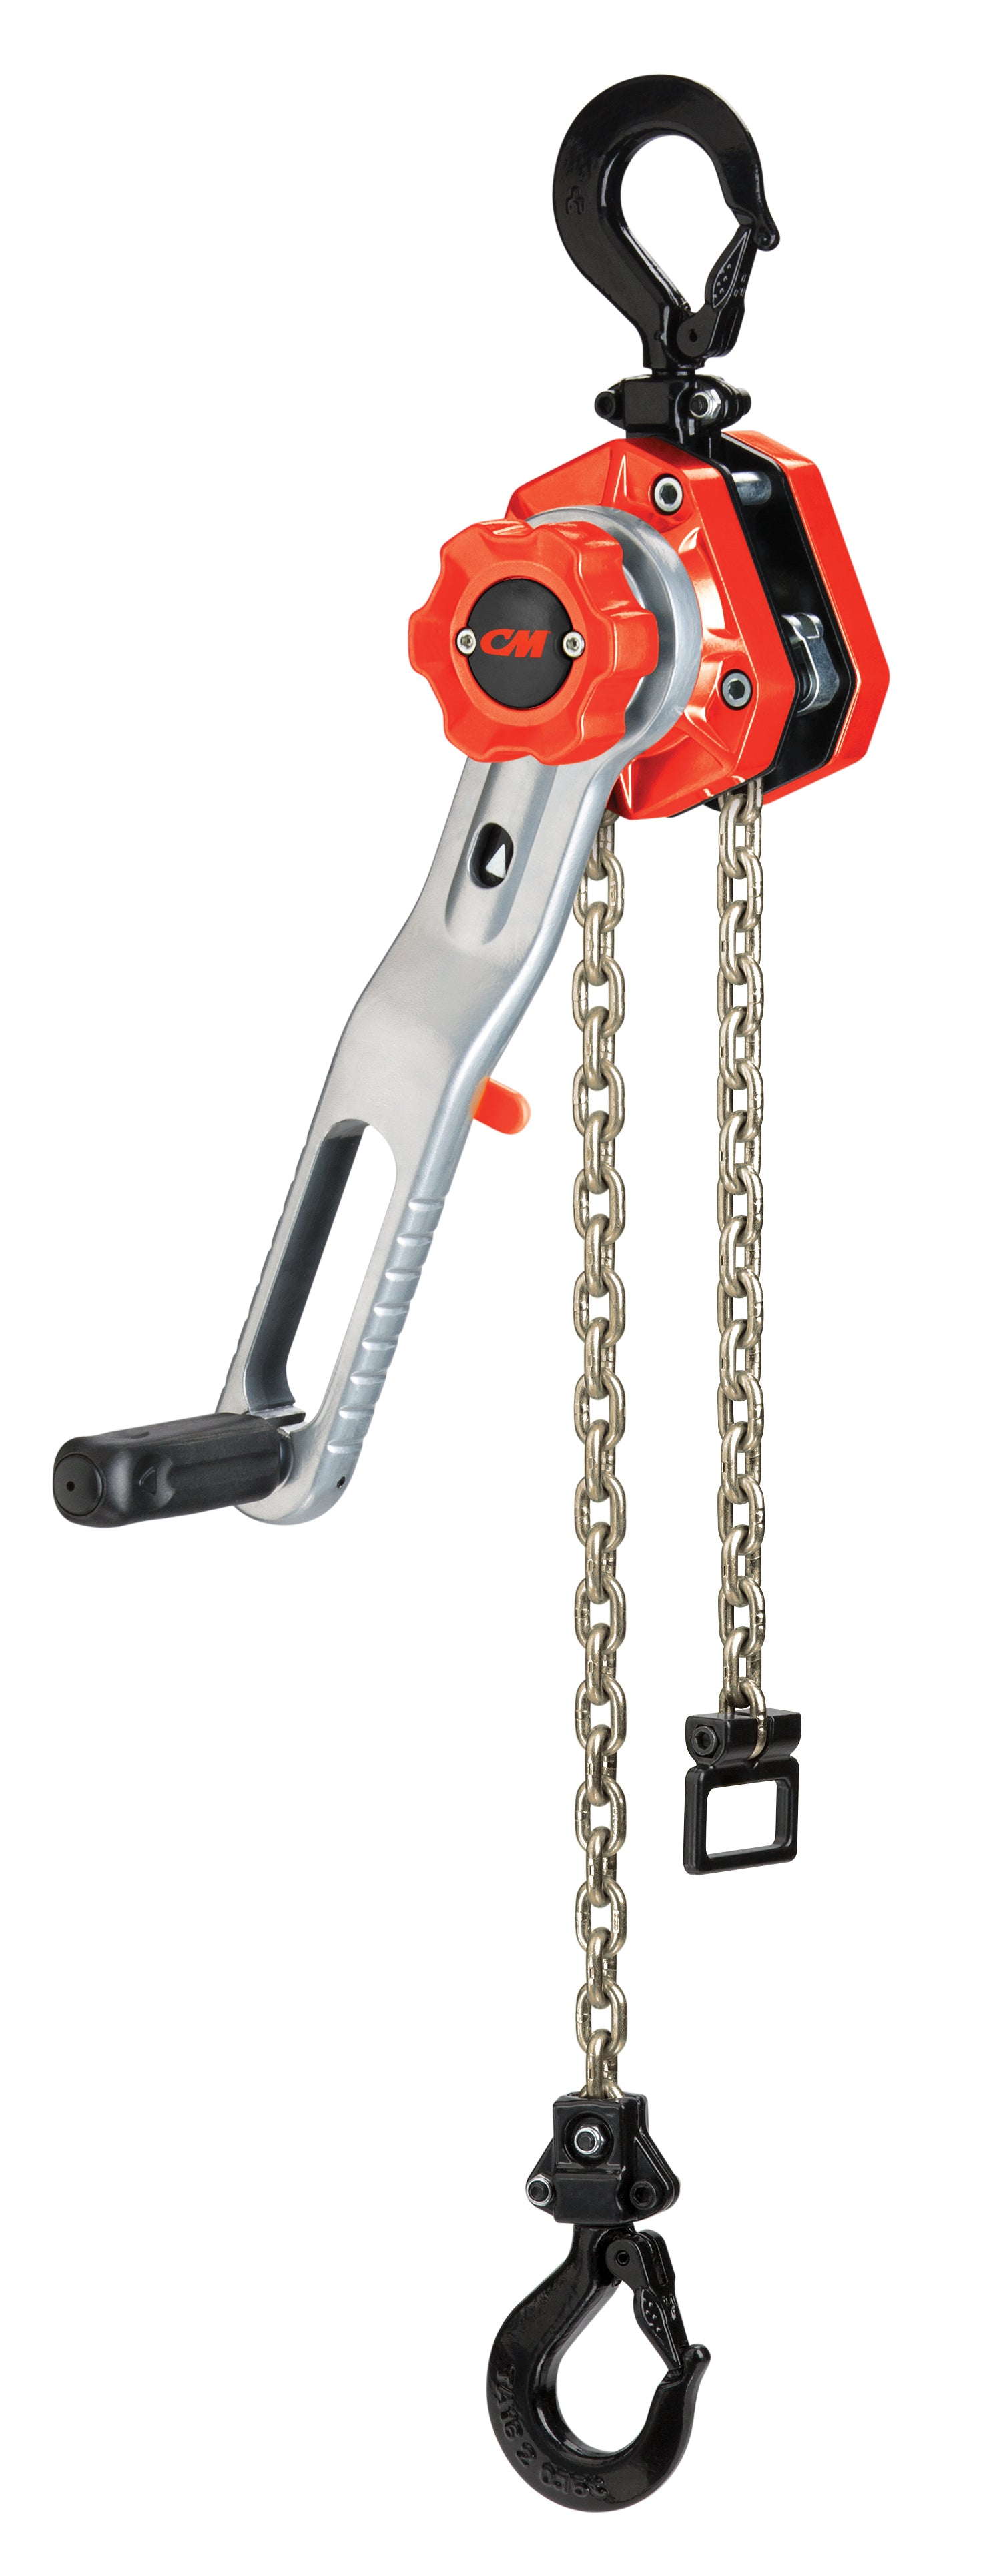 LEVER HOISTS: THE MOST VERSATILE LIFTING TOOL YOU MUST HAVE!